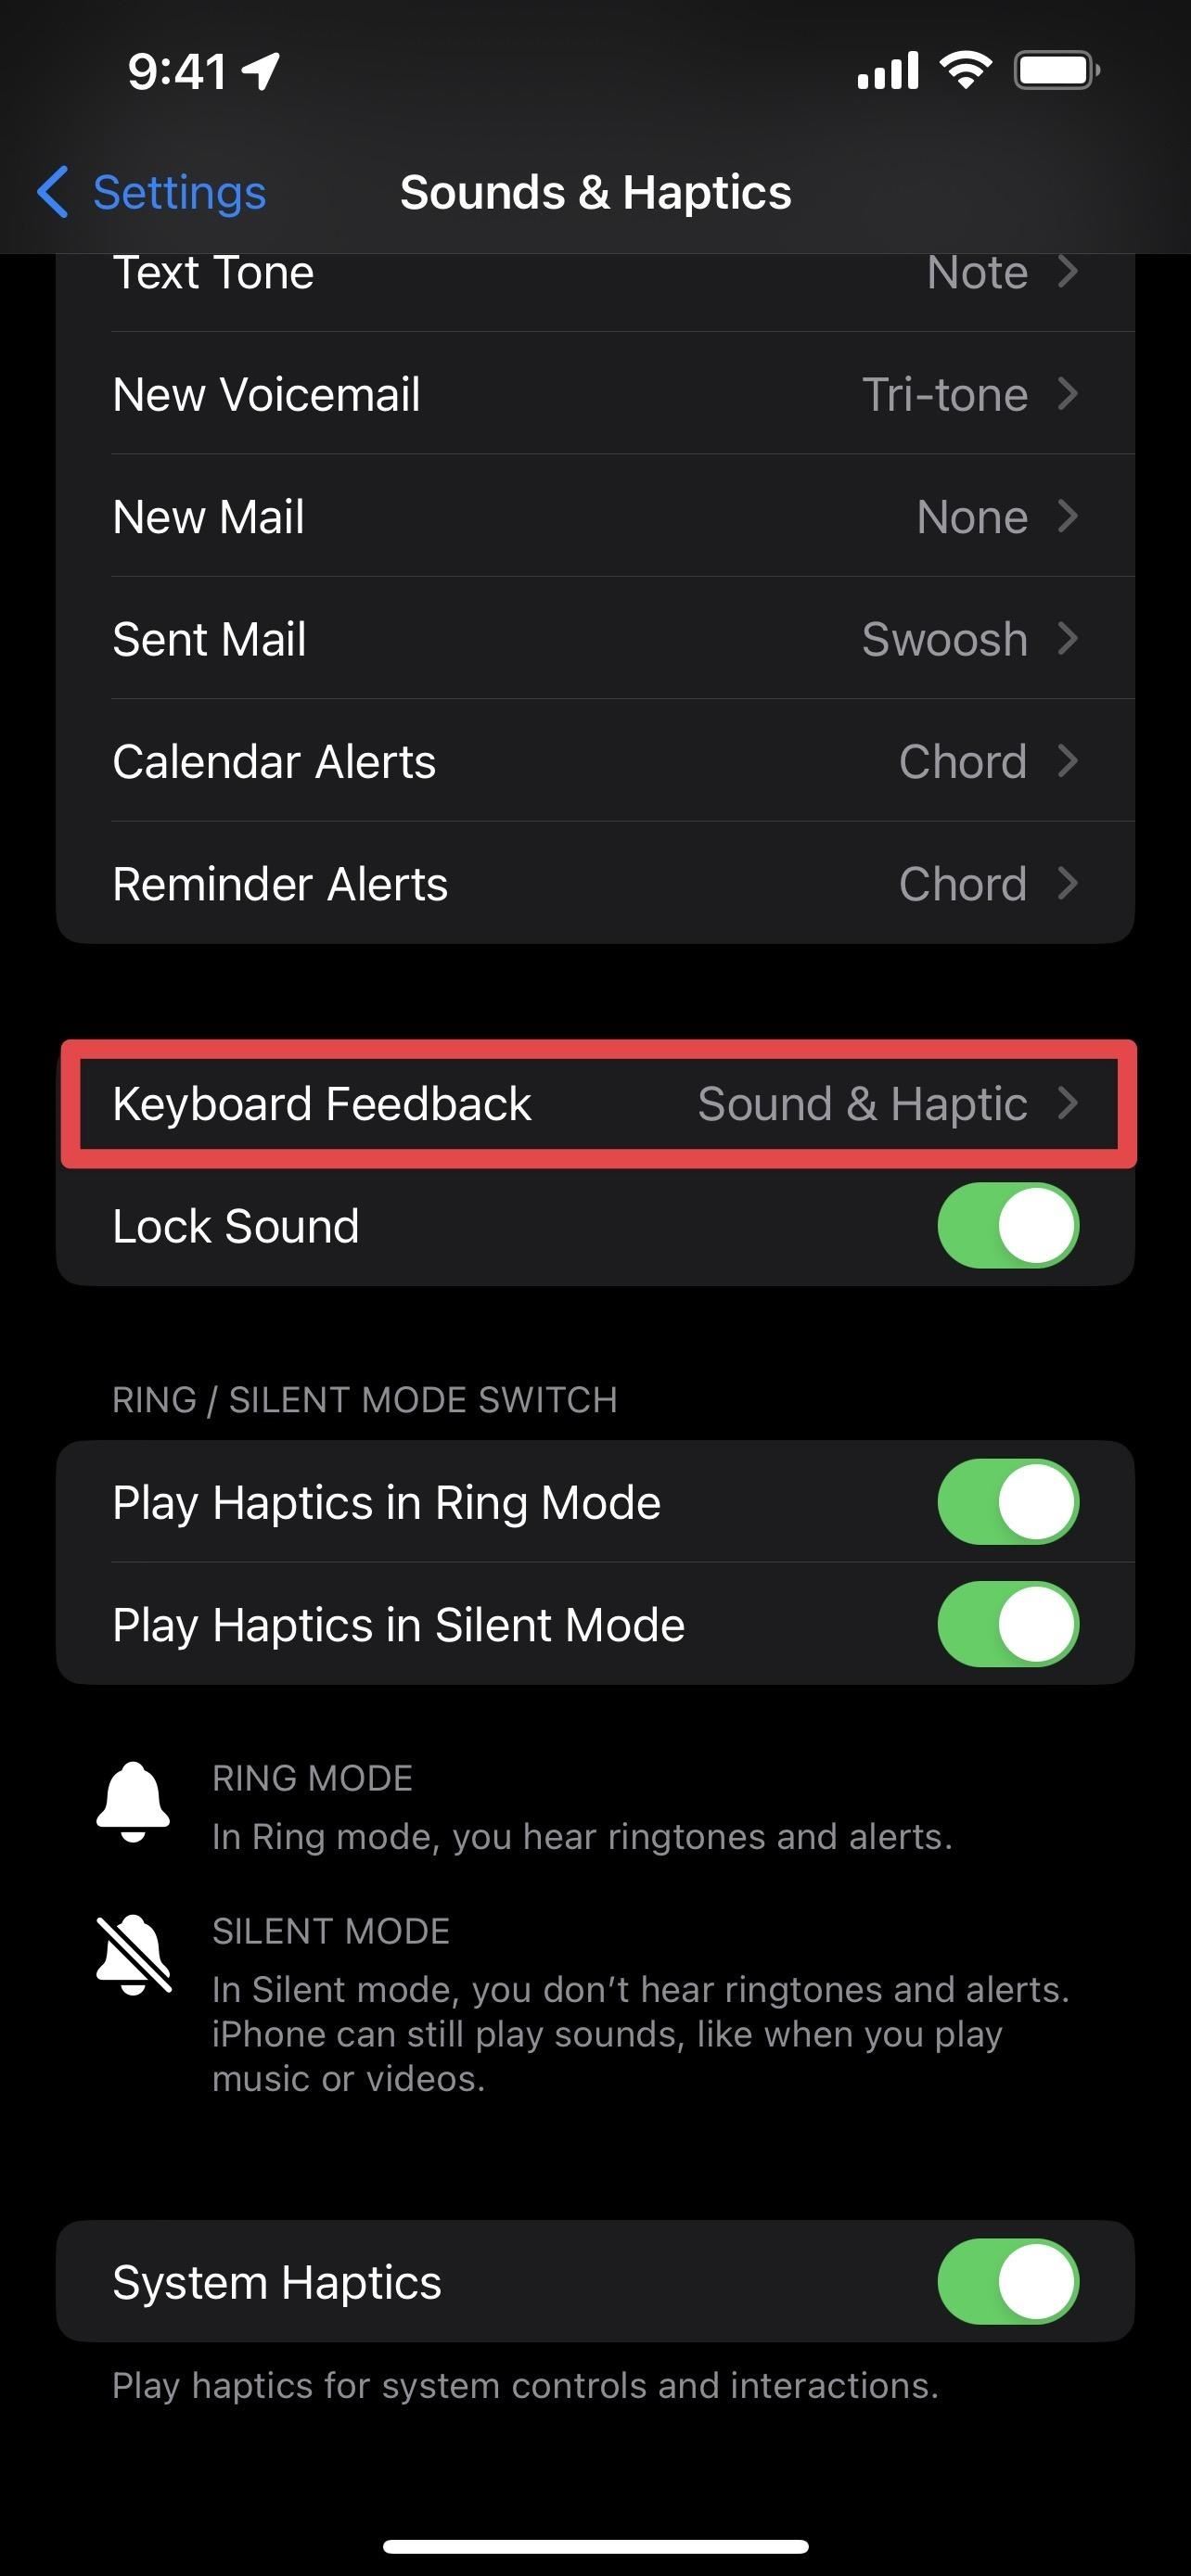 How to Unlock Haptic Feedback for Your iPhone's Keyboard to Feel Everything You Type